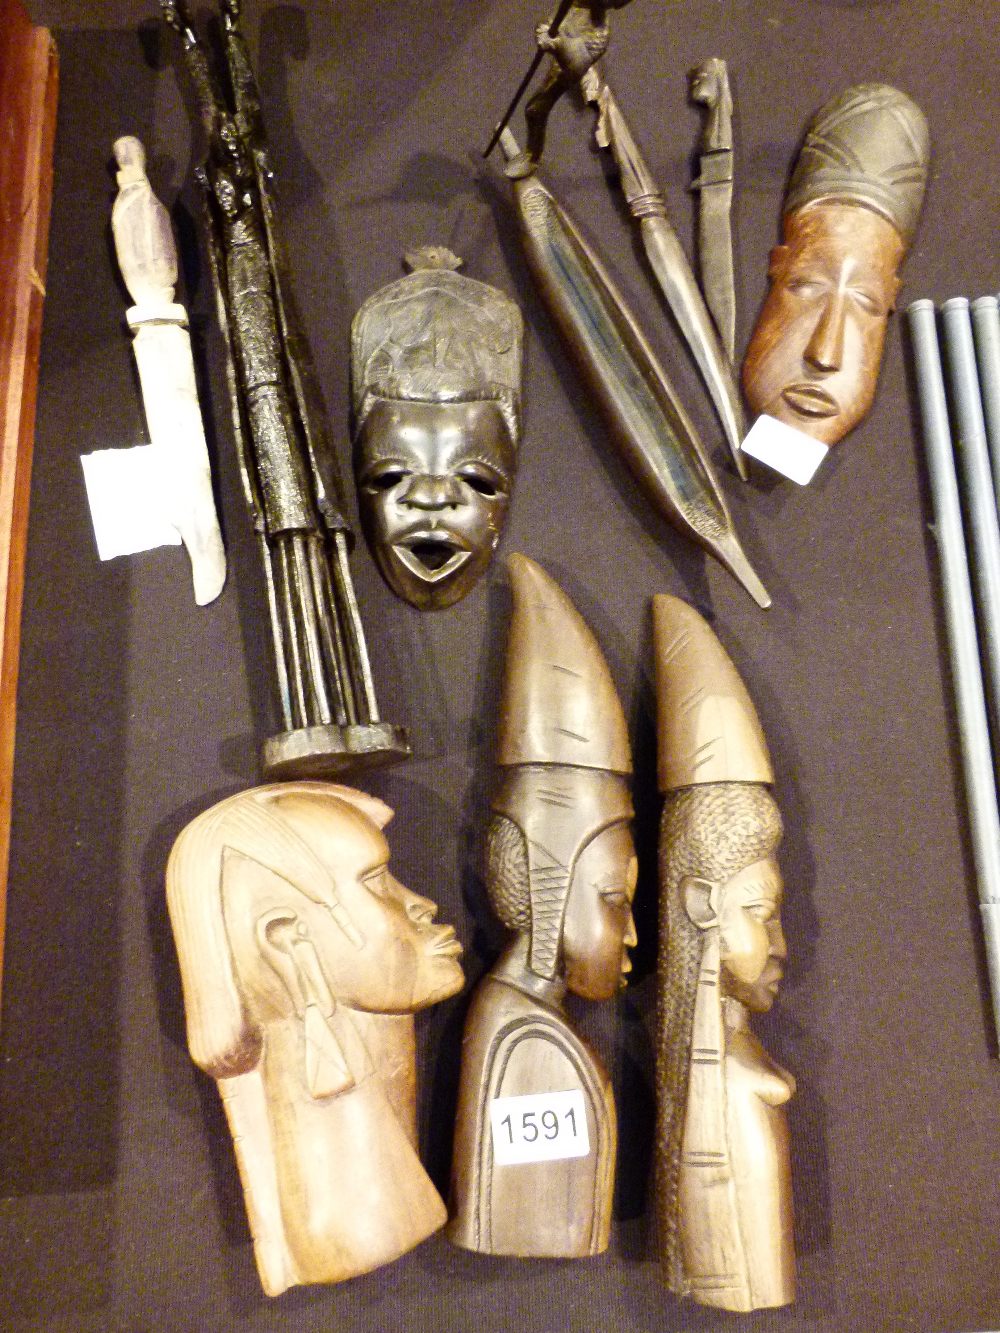 Quantity of African carvings including wooden tusks